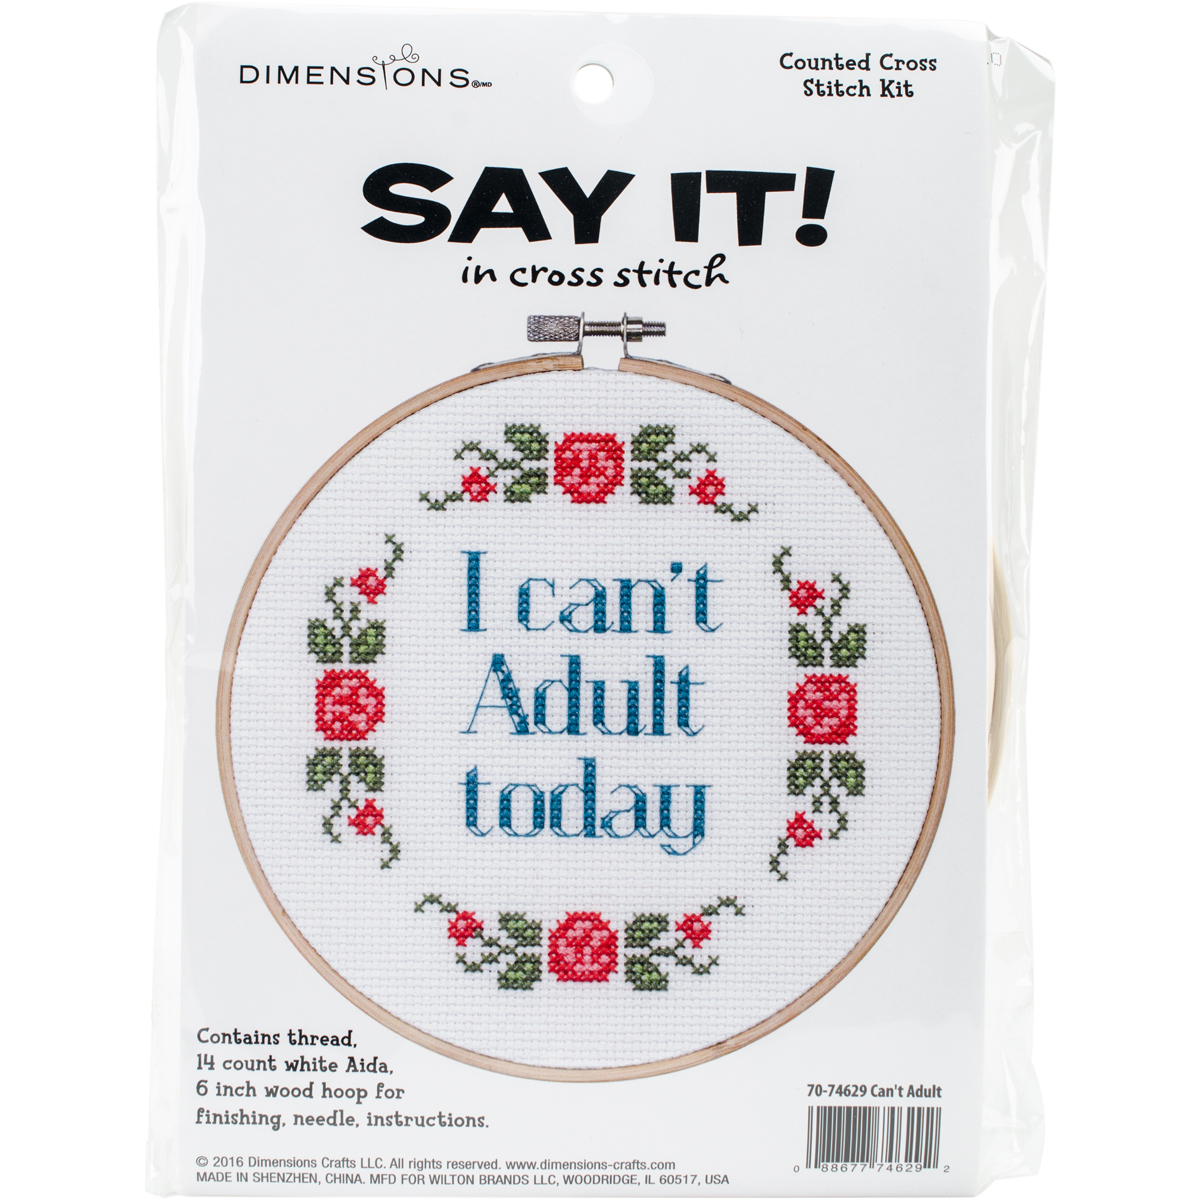 Dimensions Say It! Counted Cross Stitch Kit 6 Round-Can't Adult (14